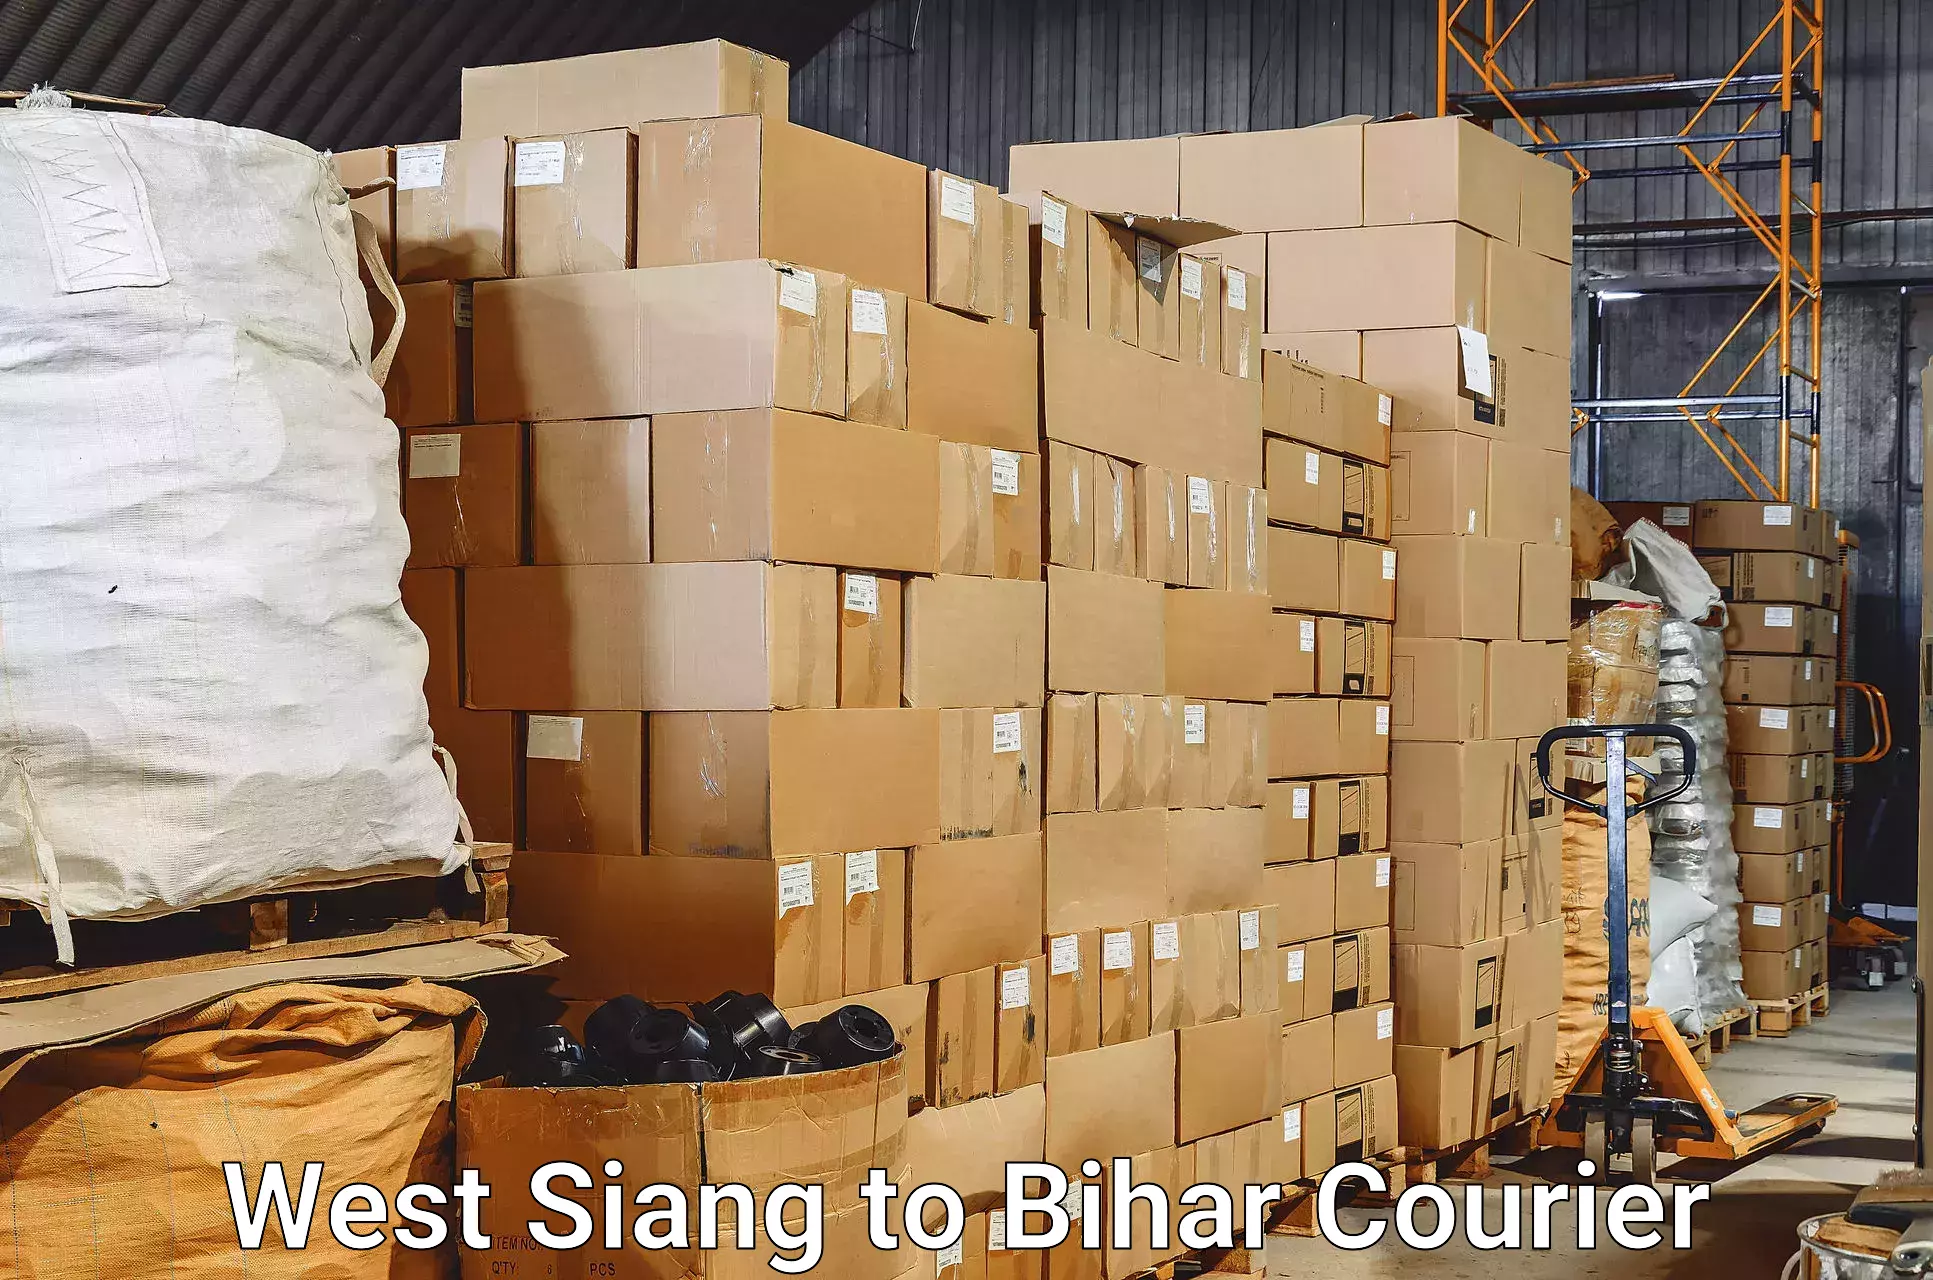 Baggage transport professionals West Siang to Bihar